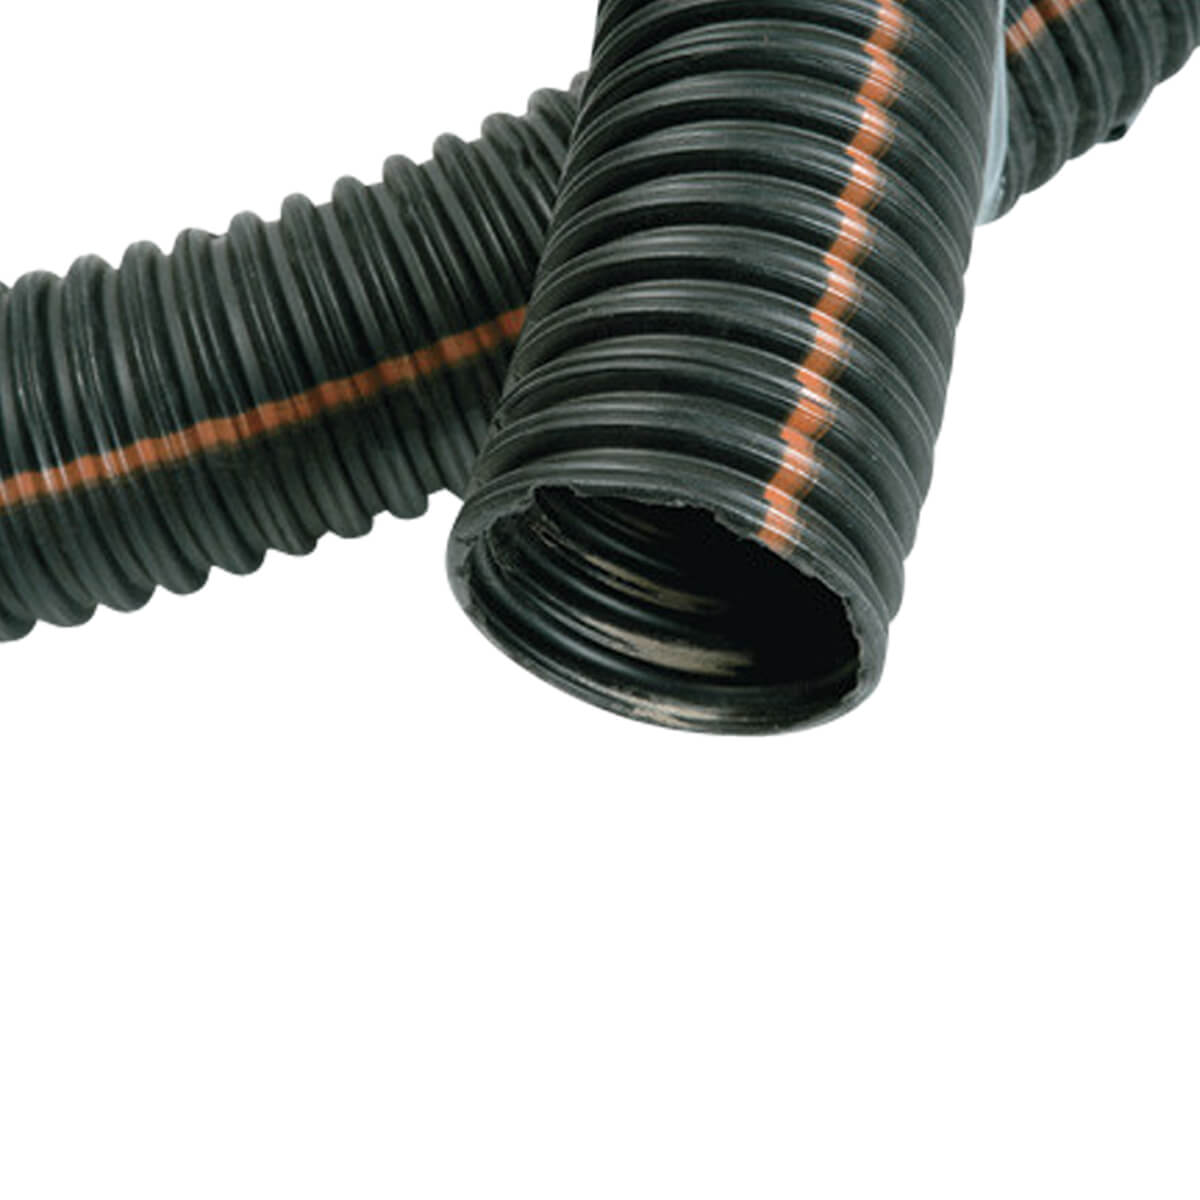 Drainage Pipe - 4-in - Price Per ft